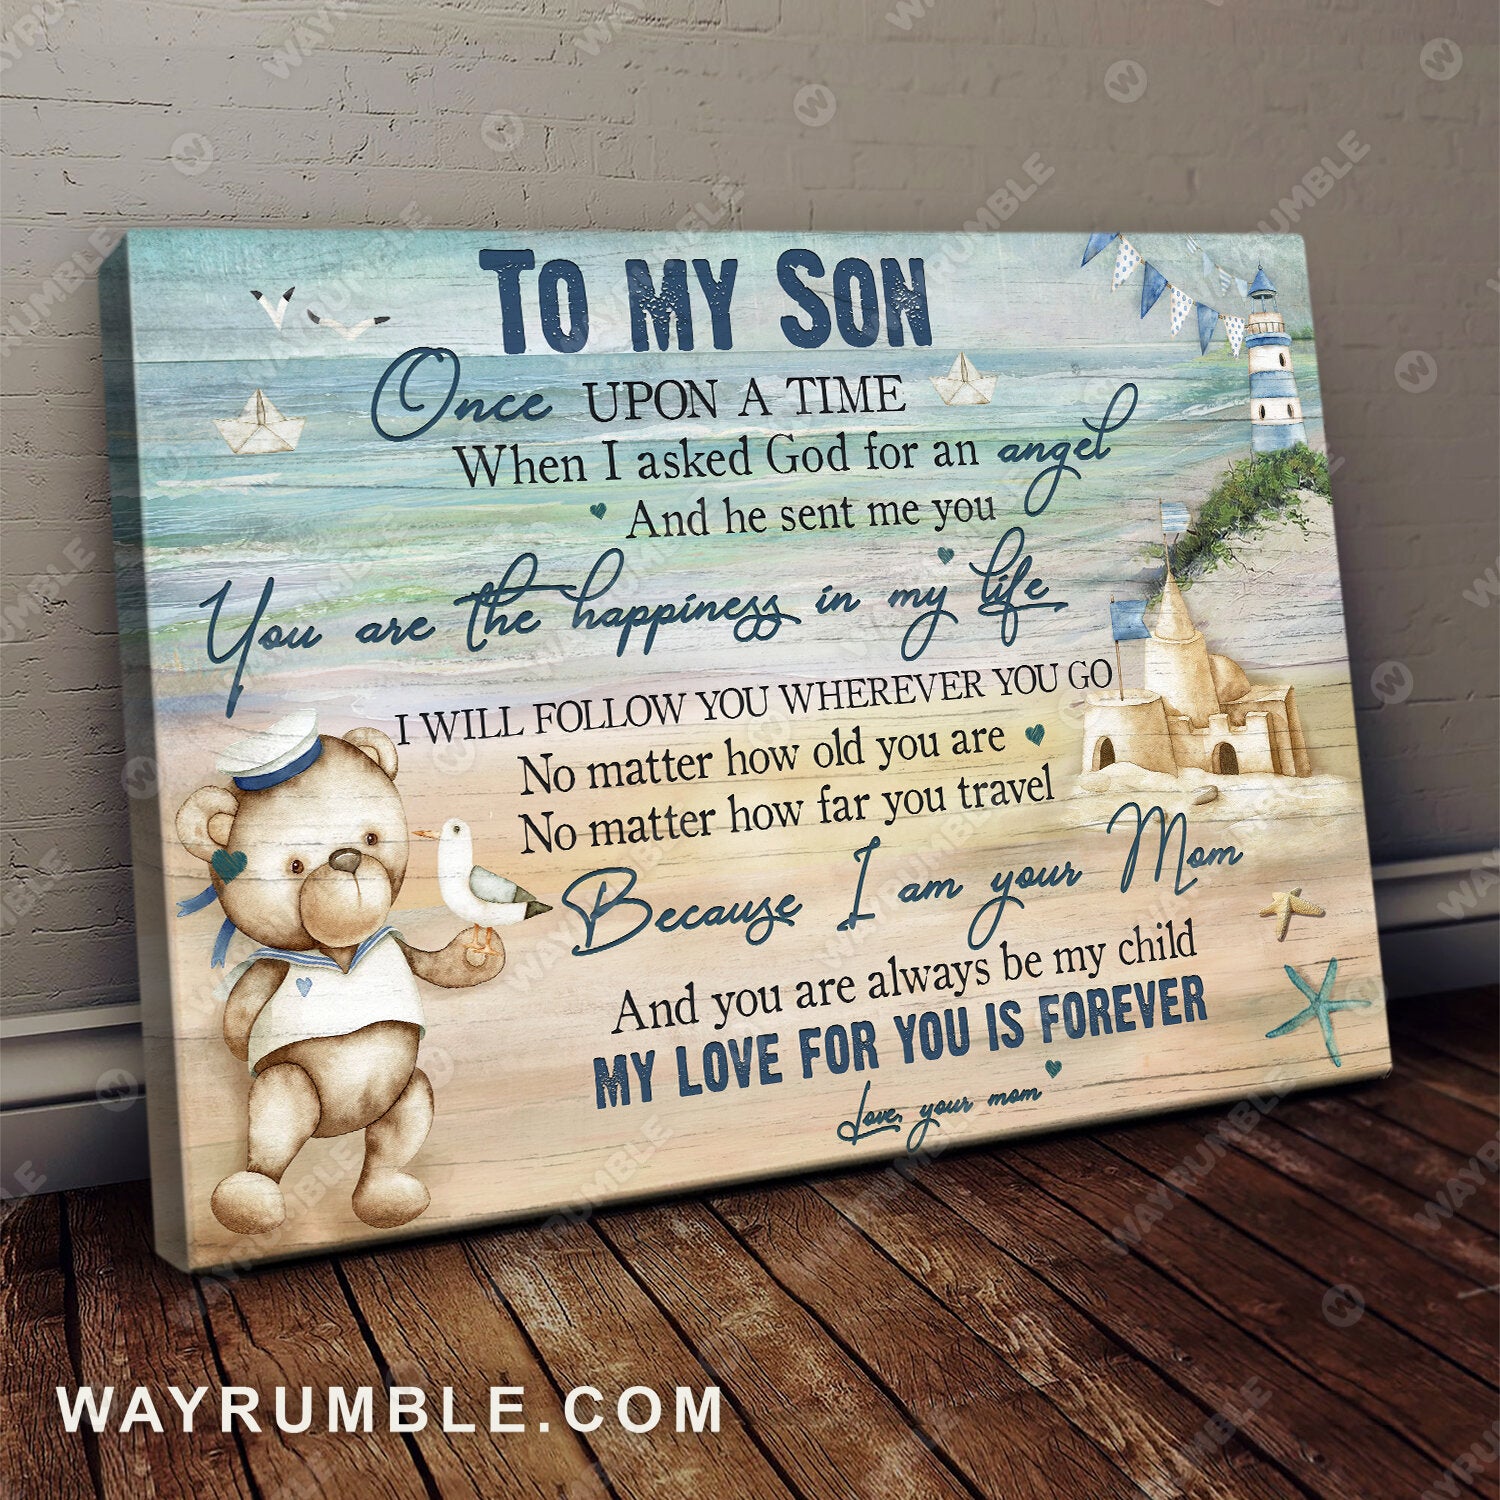 Mom to son, Teddy bear, Sand castle, You are the happiness in my life - Family Landscape Canvas Prints, Wall Art